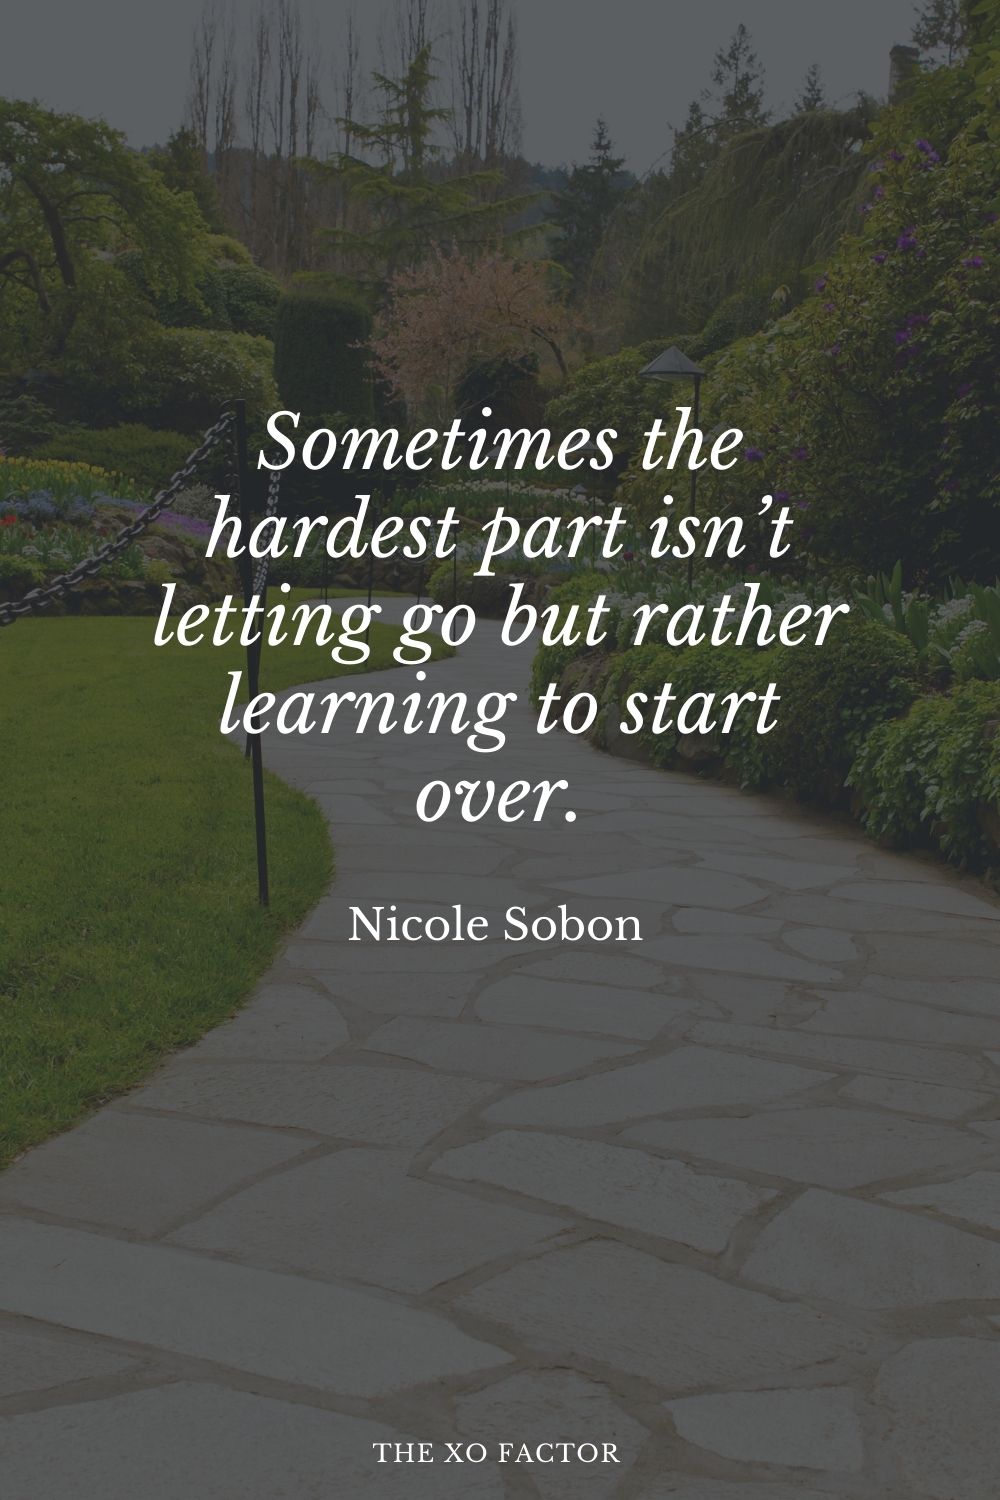 Sometimes the hardest part isn’t letting go but rather learning to start over.” Nicole Sobon